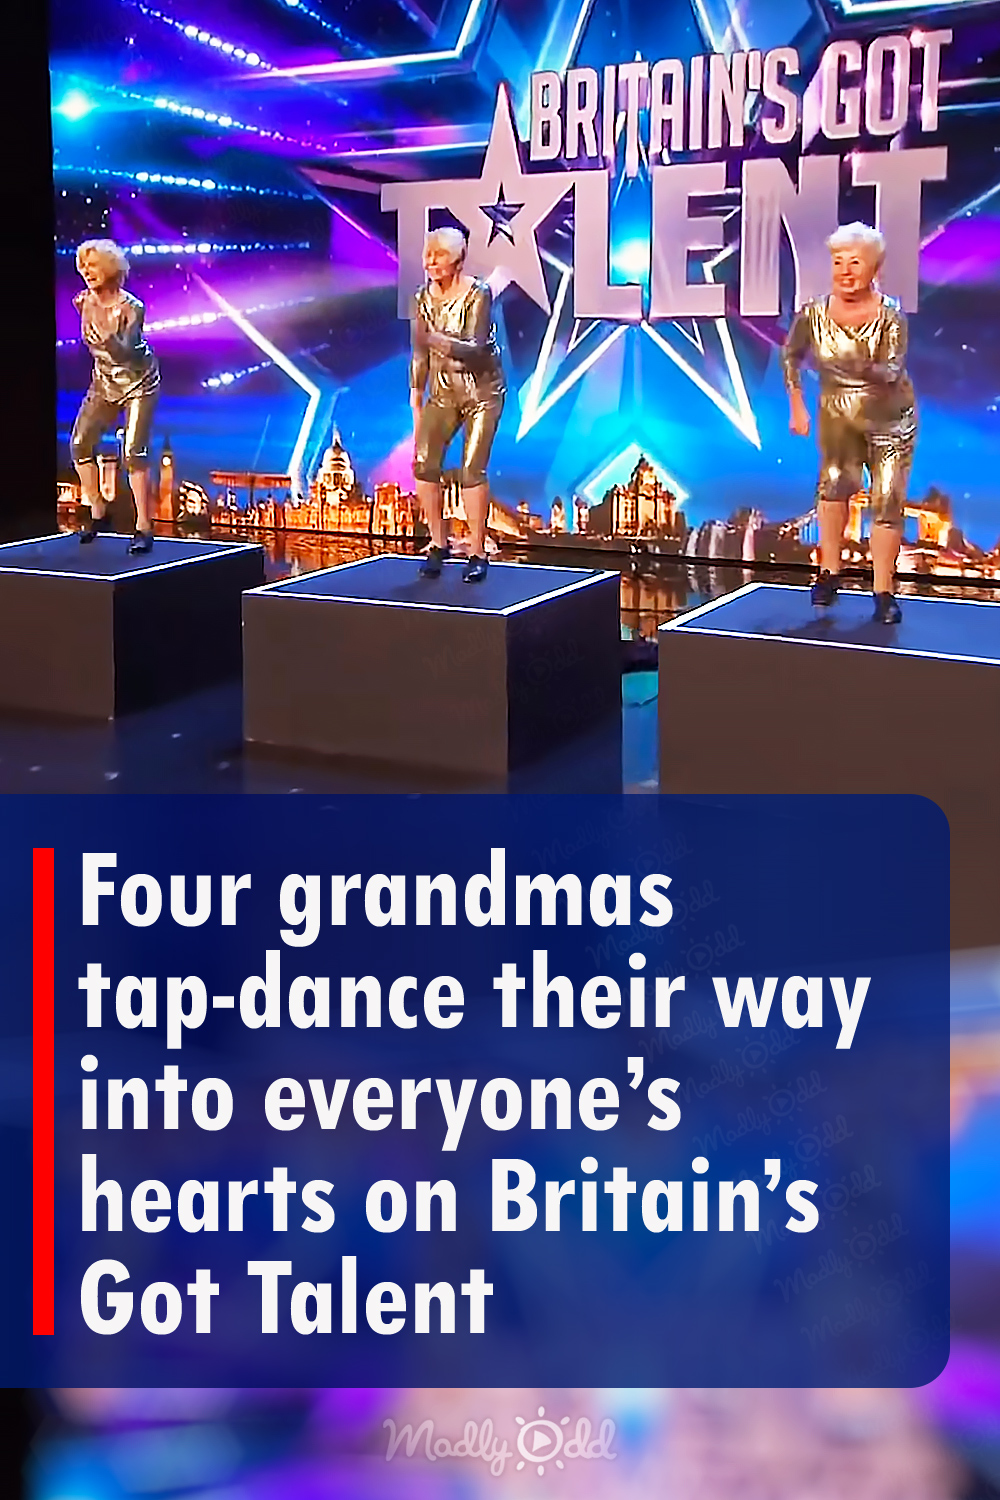 Four grandmas tap-dance their way into everyone’s hearts on Britain’s Got Talent